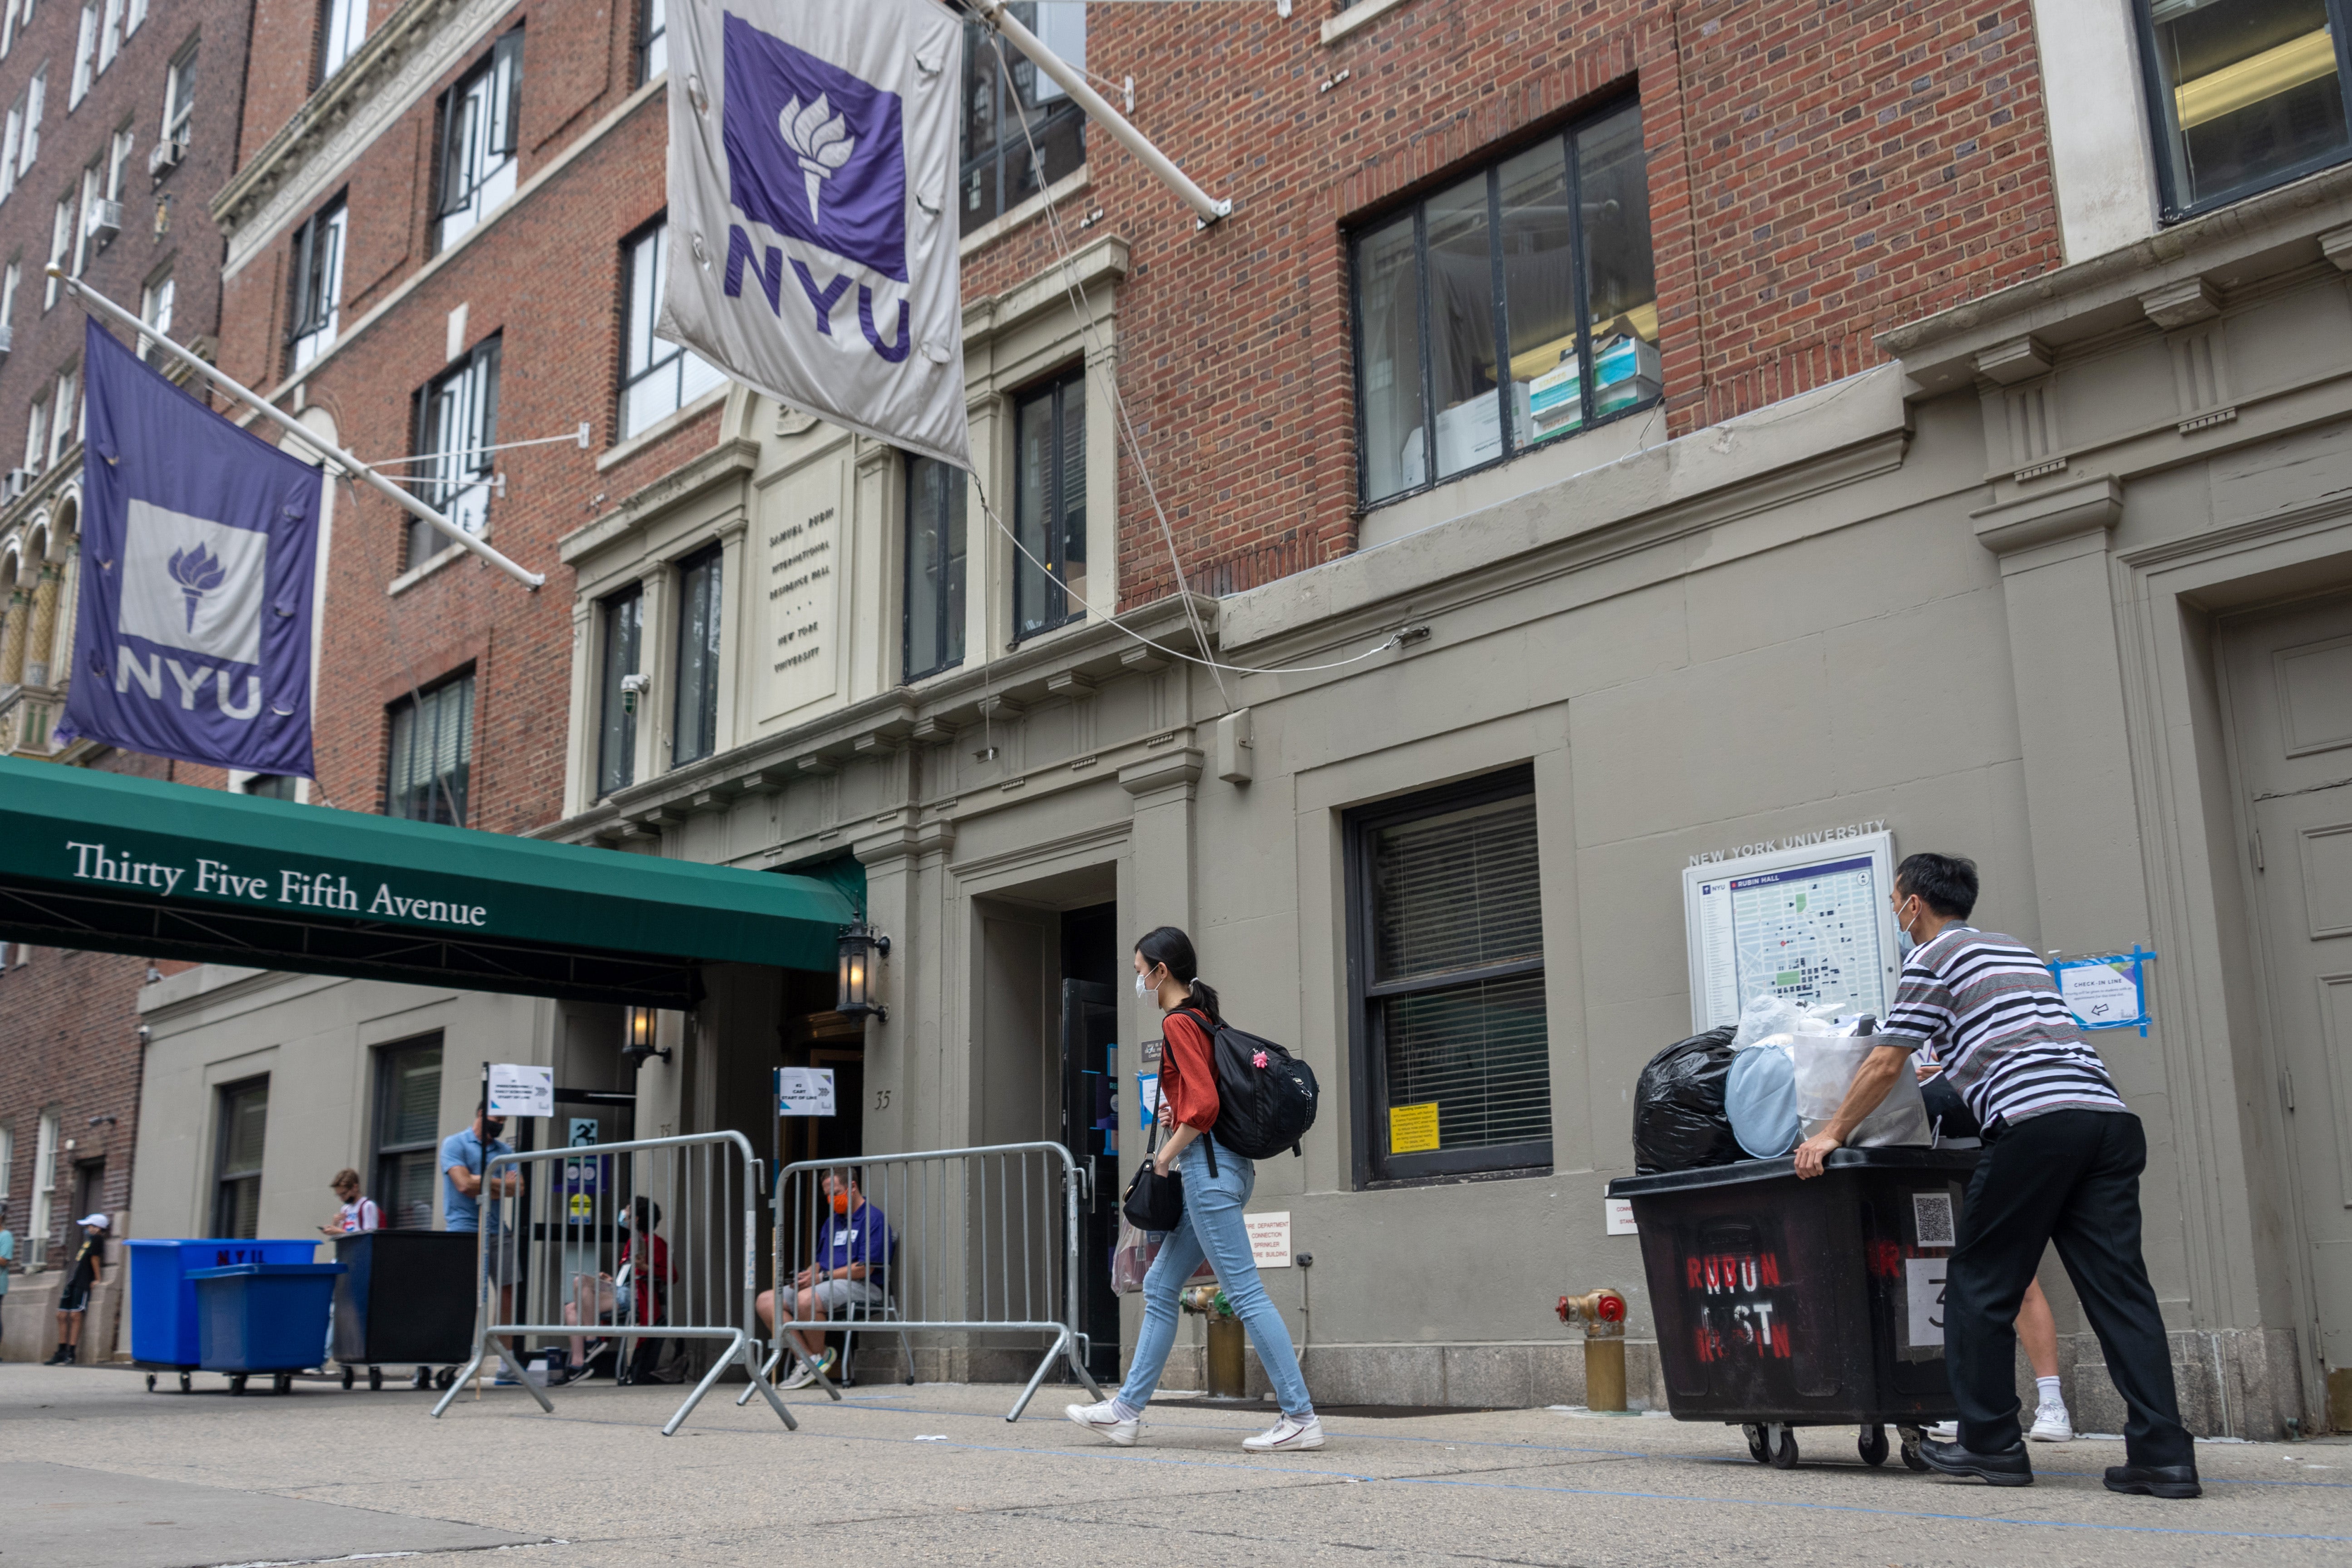 NYU tour pelted with eggs as homeless continually harass groups in Greenwich Village